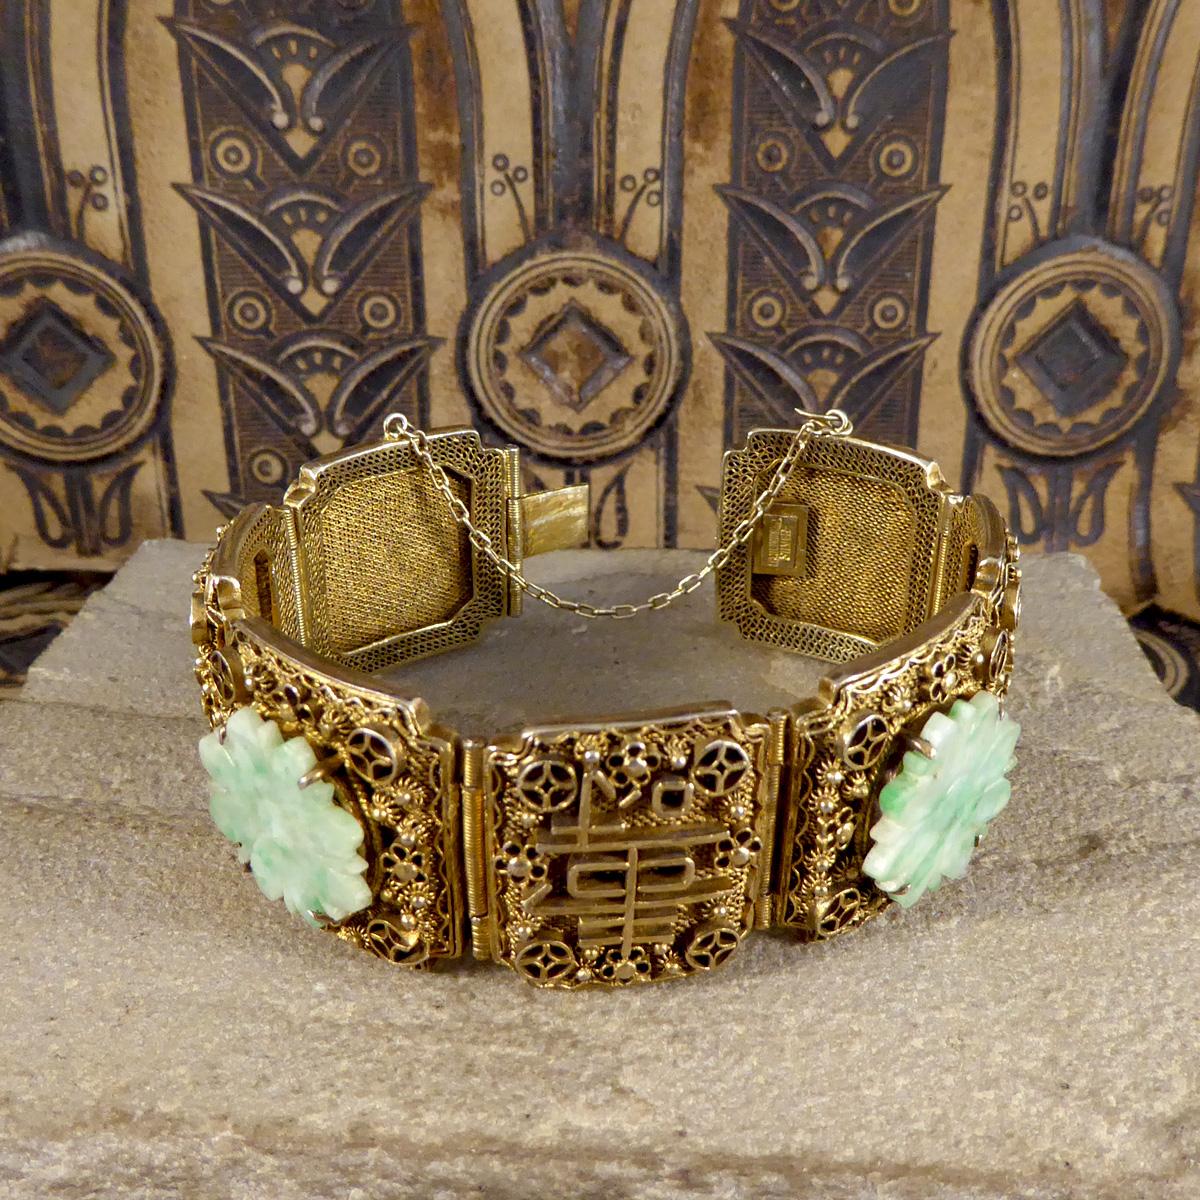 Women's or Men's Vintage Jade Carved Flowered Wide Panel Bracelet with Chinese Proverbs in Silver